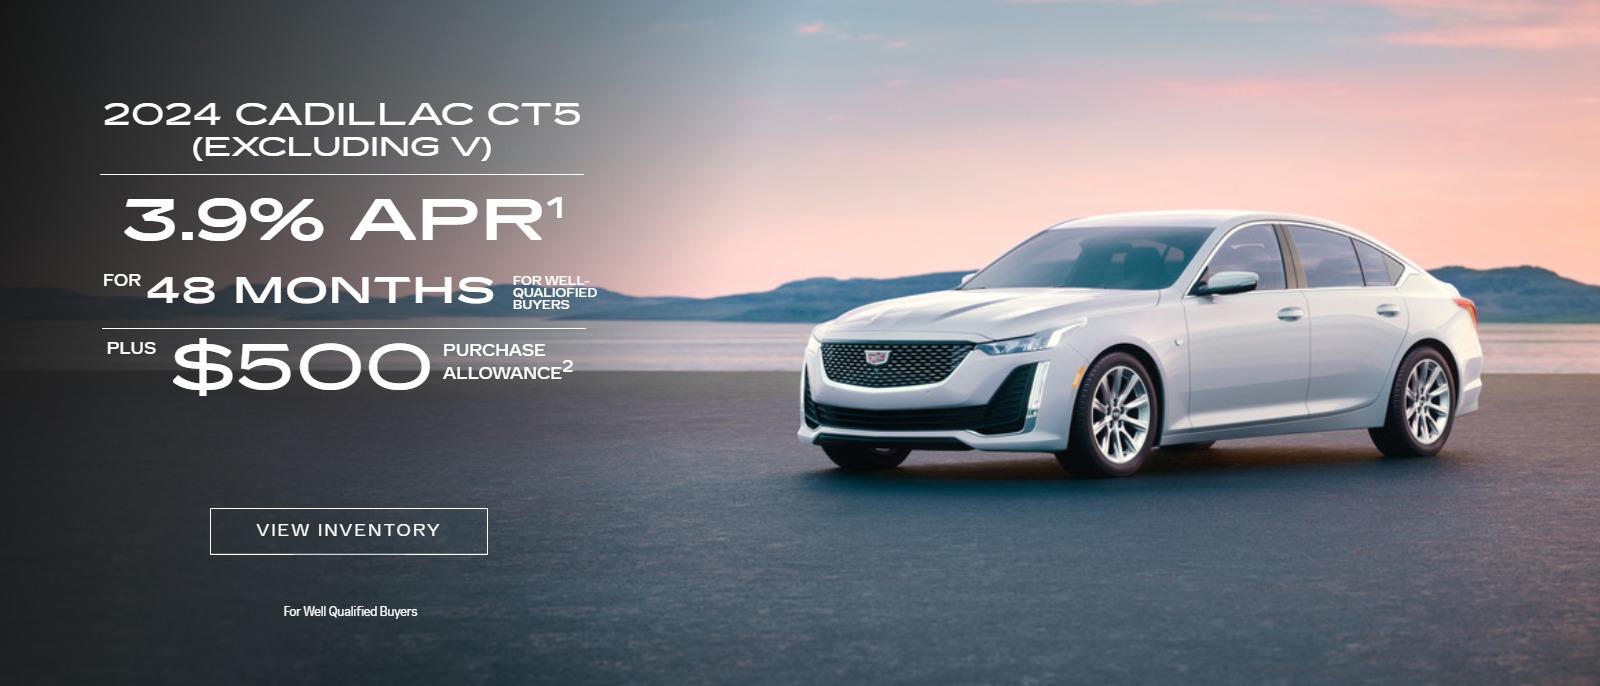 2024 CADILLAC CT5 excluding V
3.9% APR for 48 months
PLUS $500 Purchase Allowance